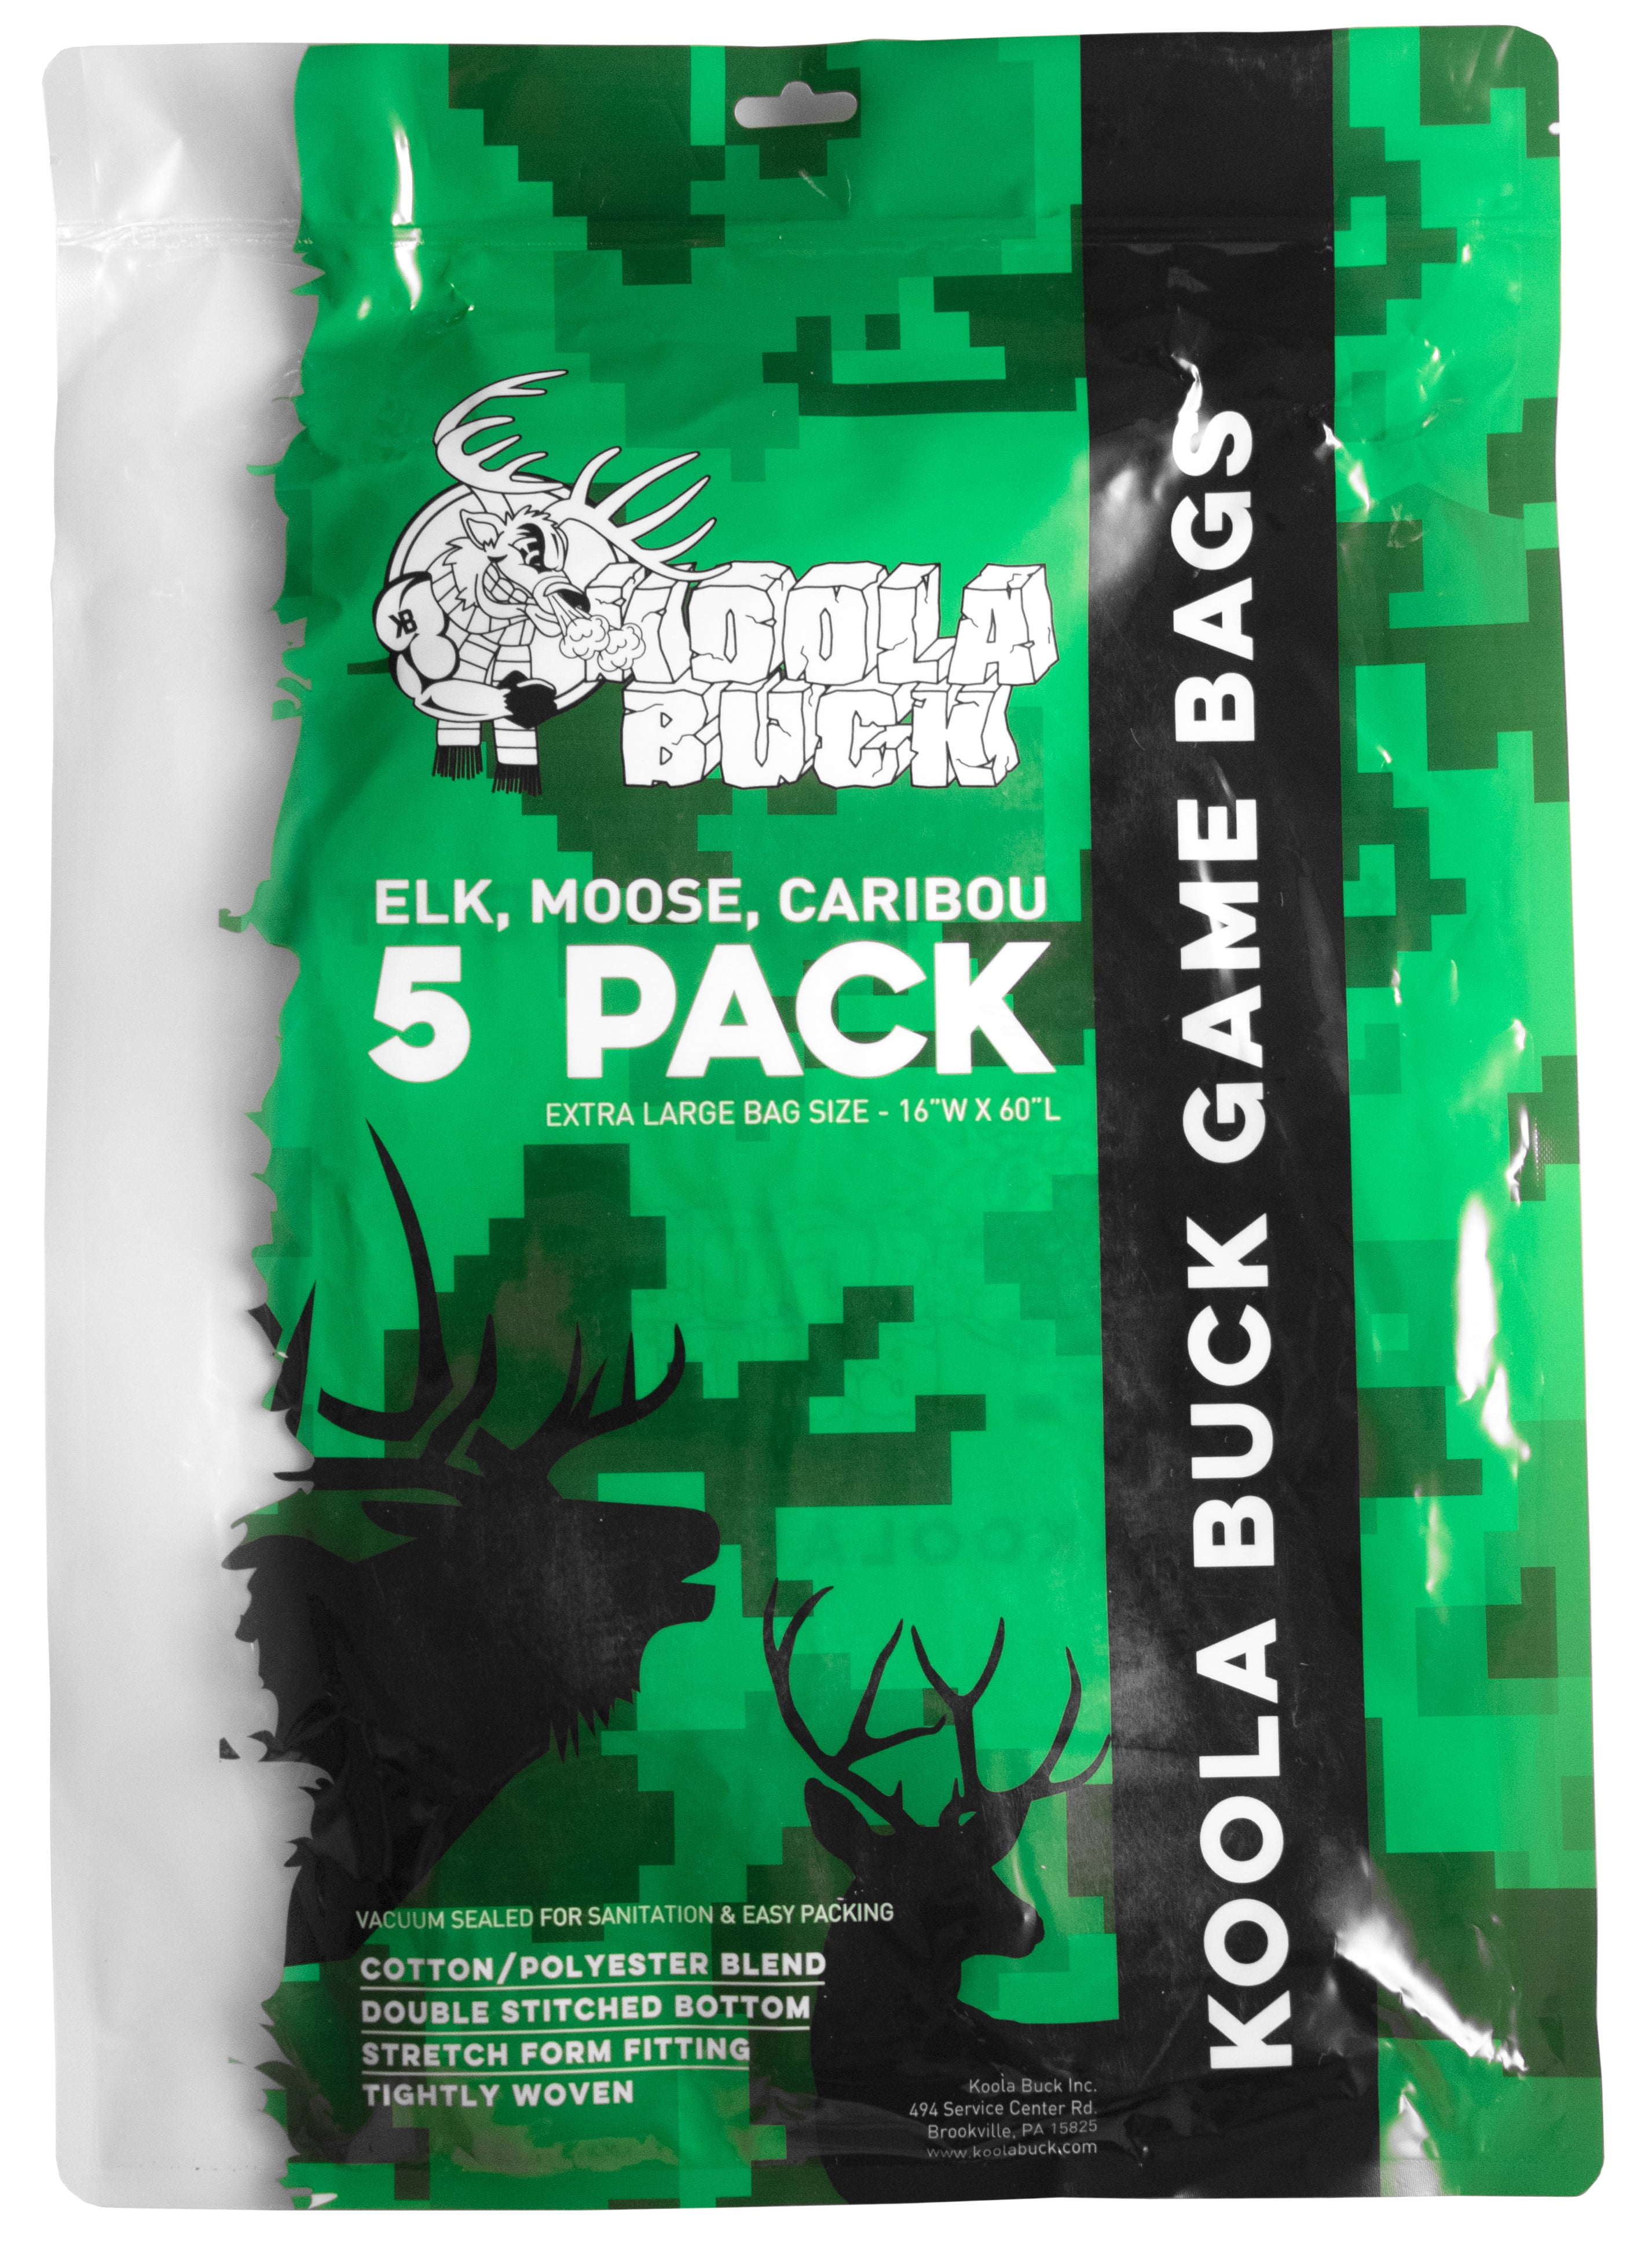 Aussio (150-Pack) Wild Game Meat Bags (1 Lb Capacity) - 10.5 x